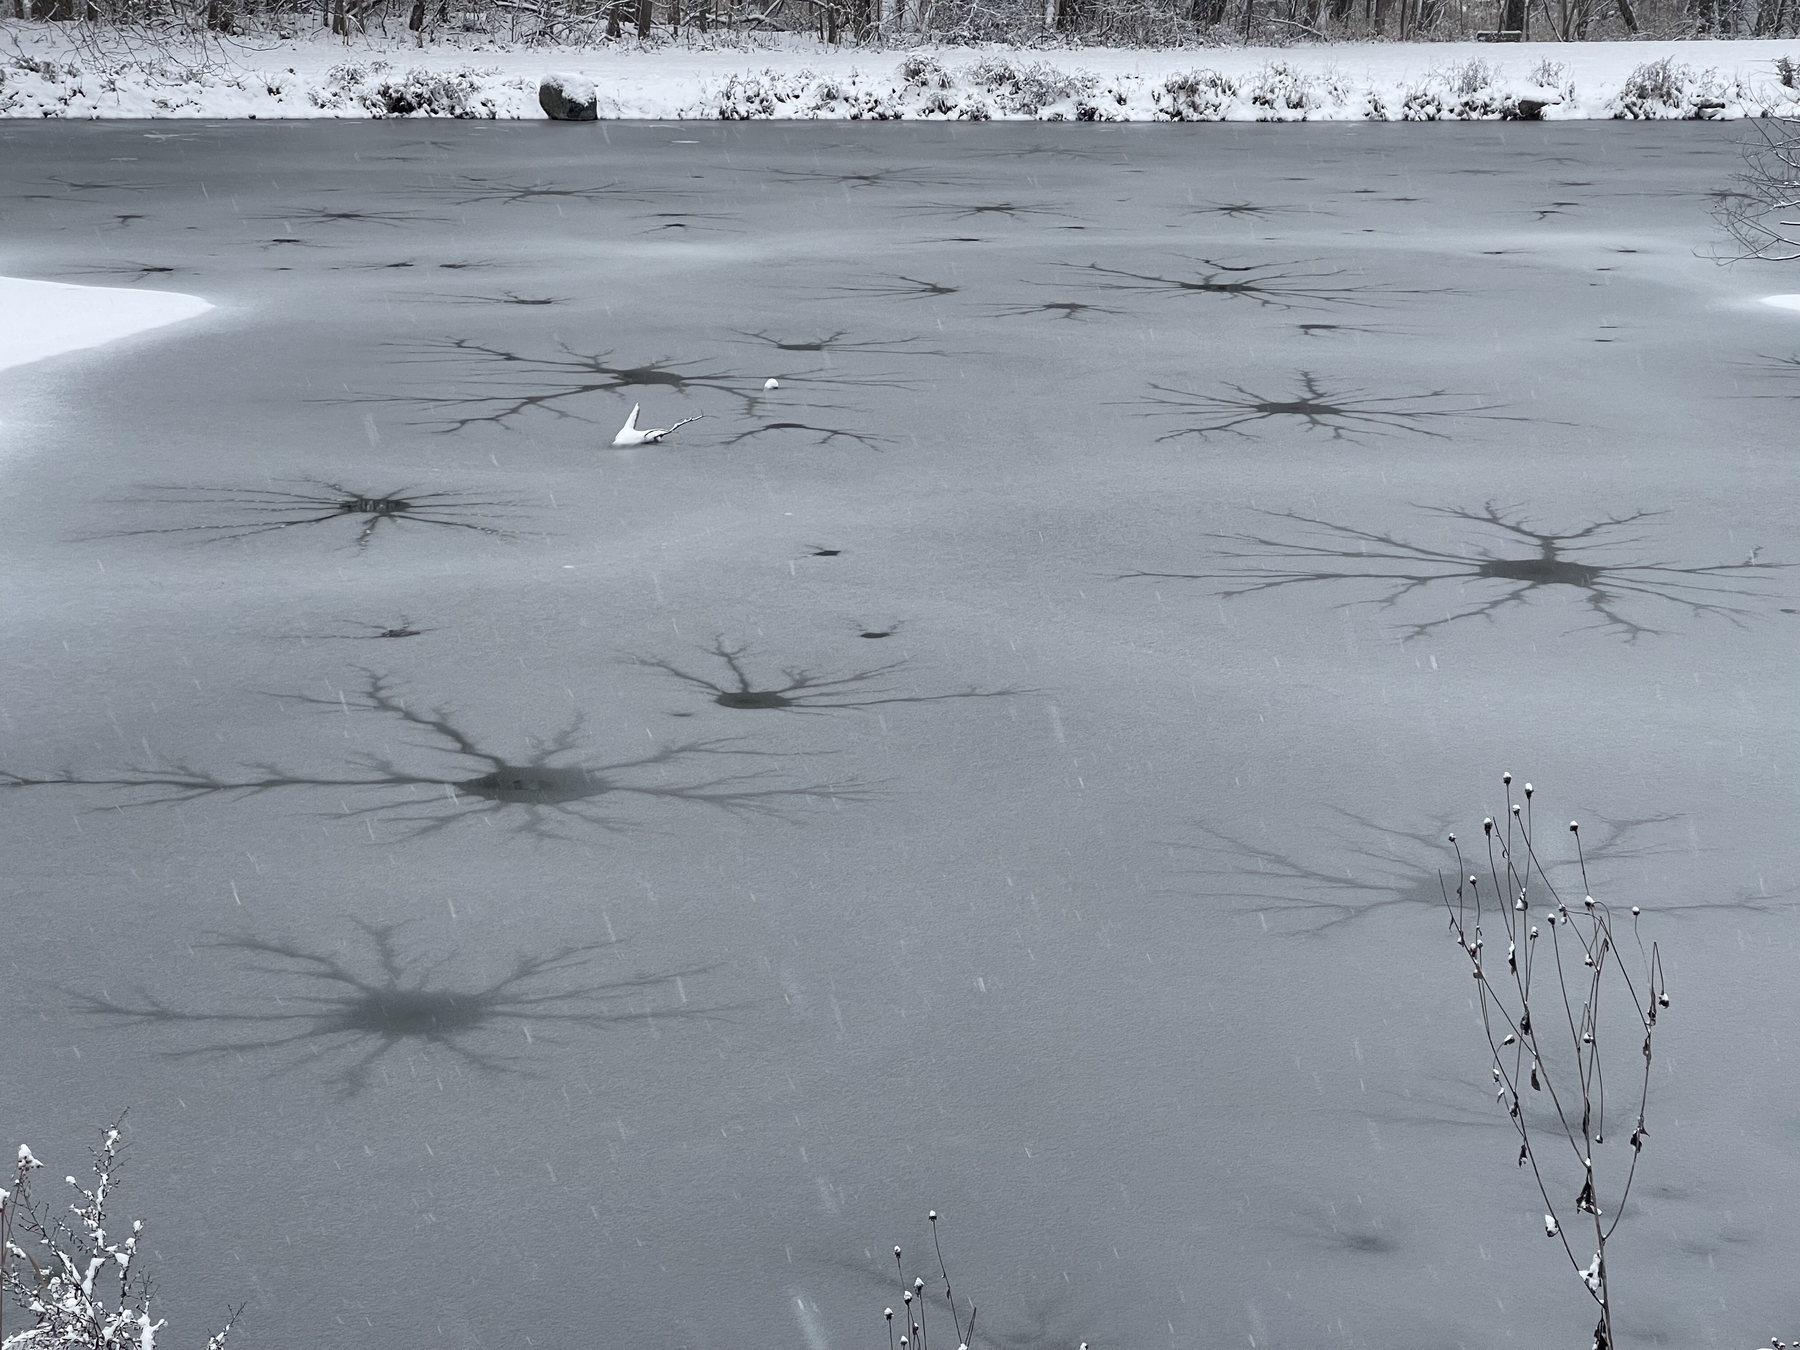 Branching ripples on the snow-covered thin layer of ice.